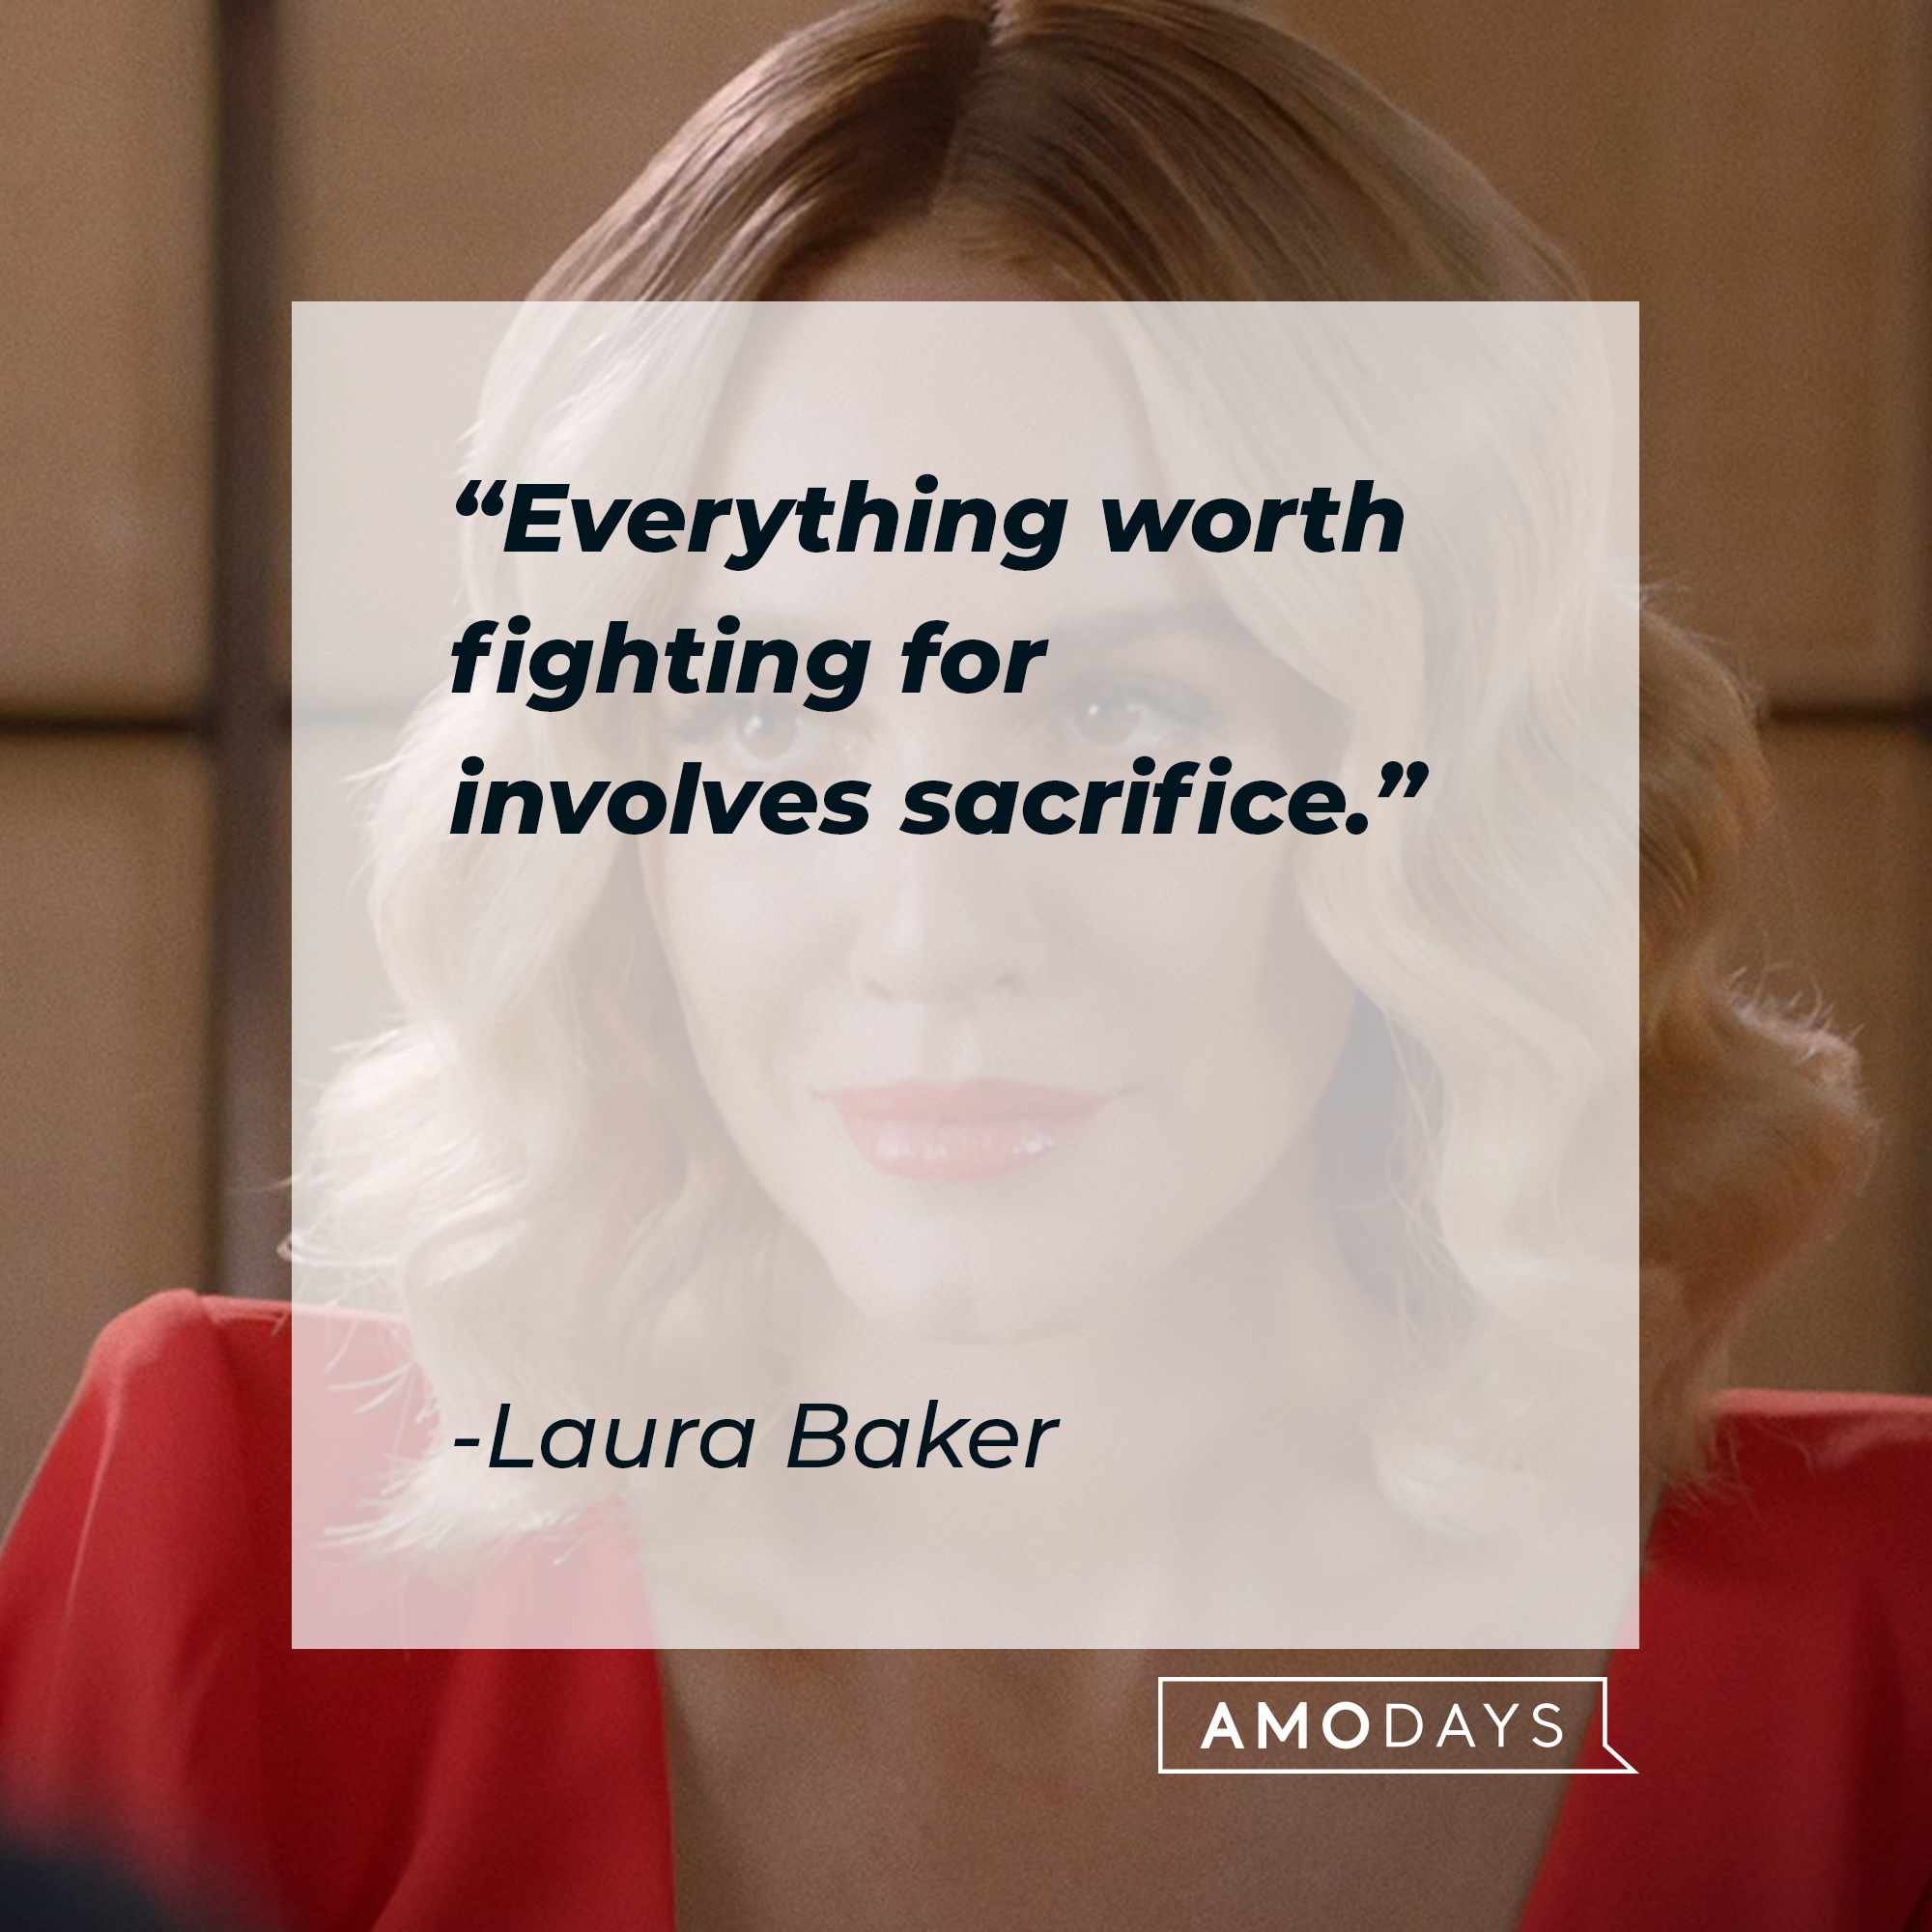 Laura Baker's quote: "Everything worth fighting for involves sacrifice." | Source: facebook.com/CWAllAmerican